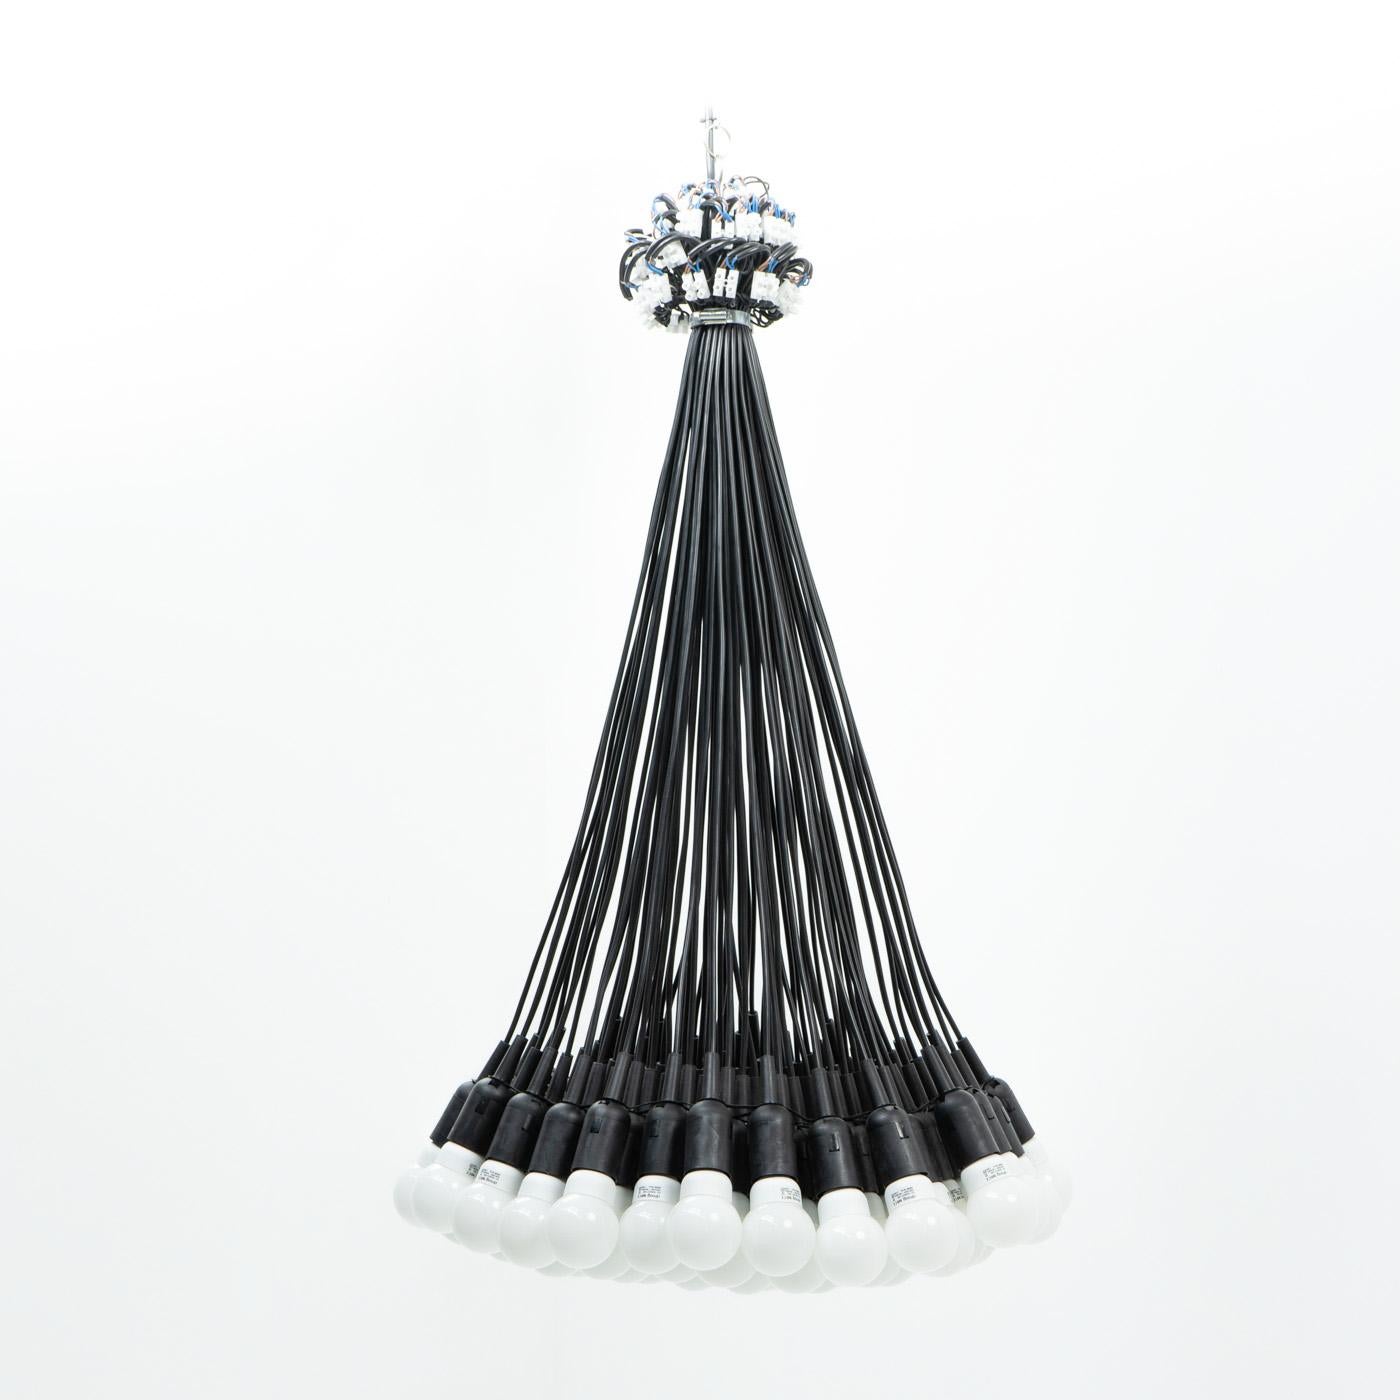 85 LED Lamps, by Rody Graumans for Droog design -  1990s In Good Condition For Sale In Renens, CH